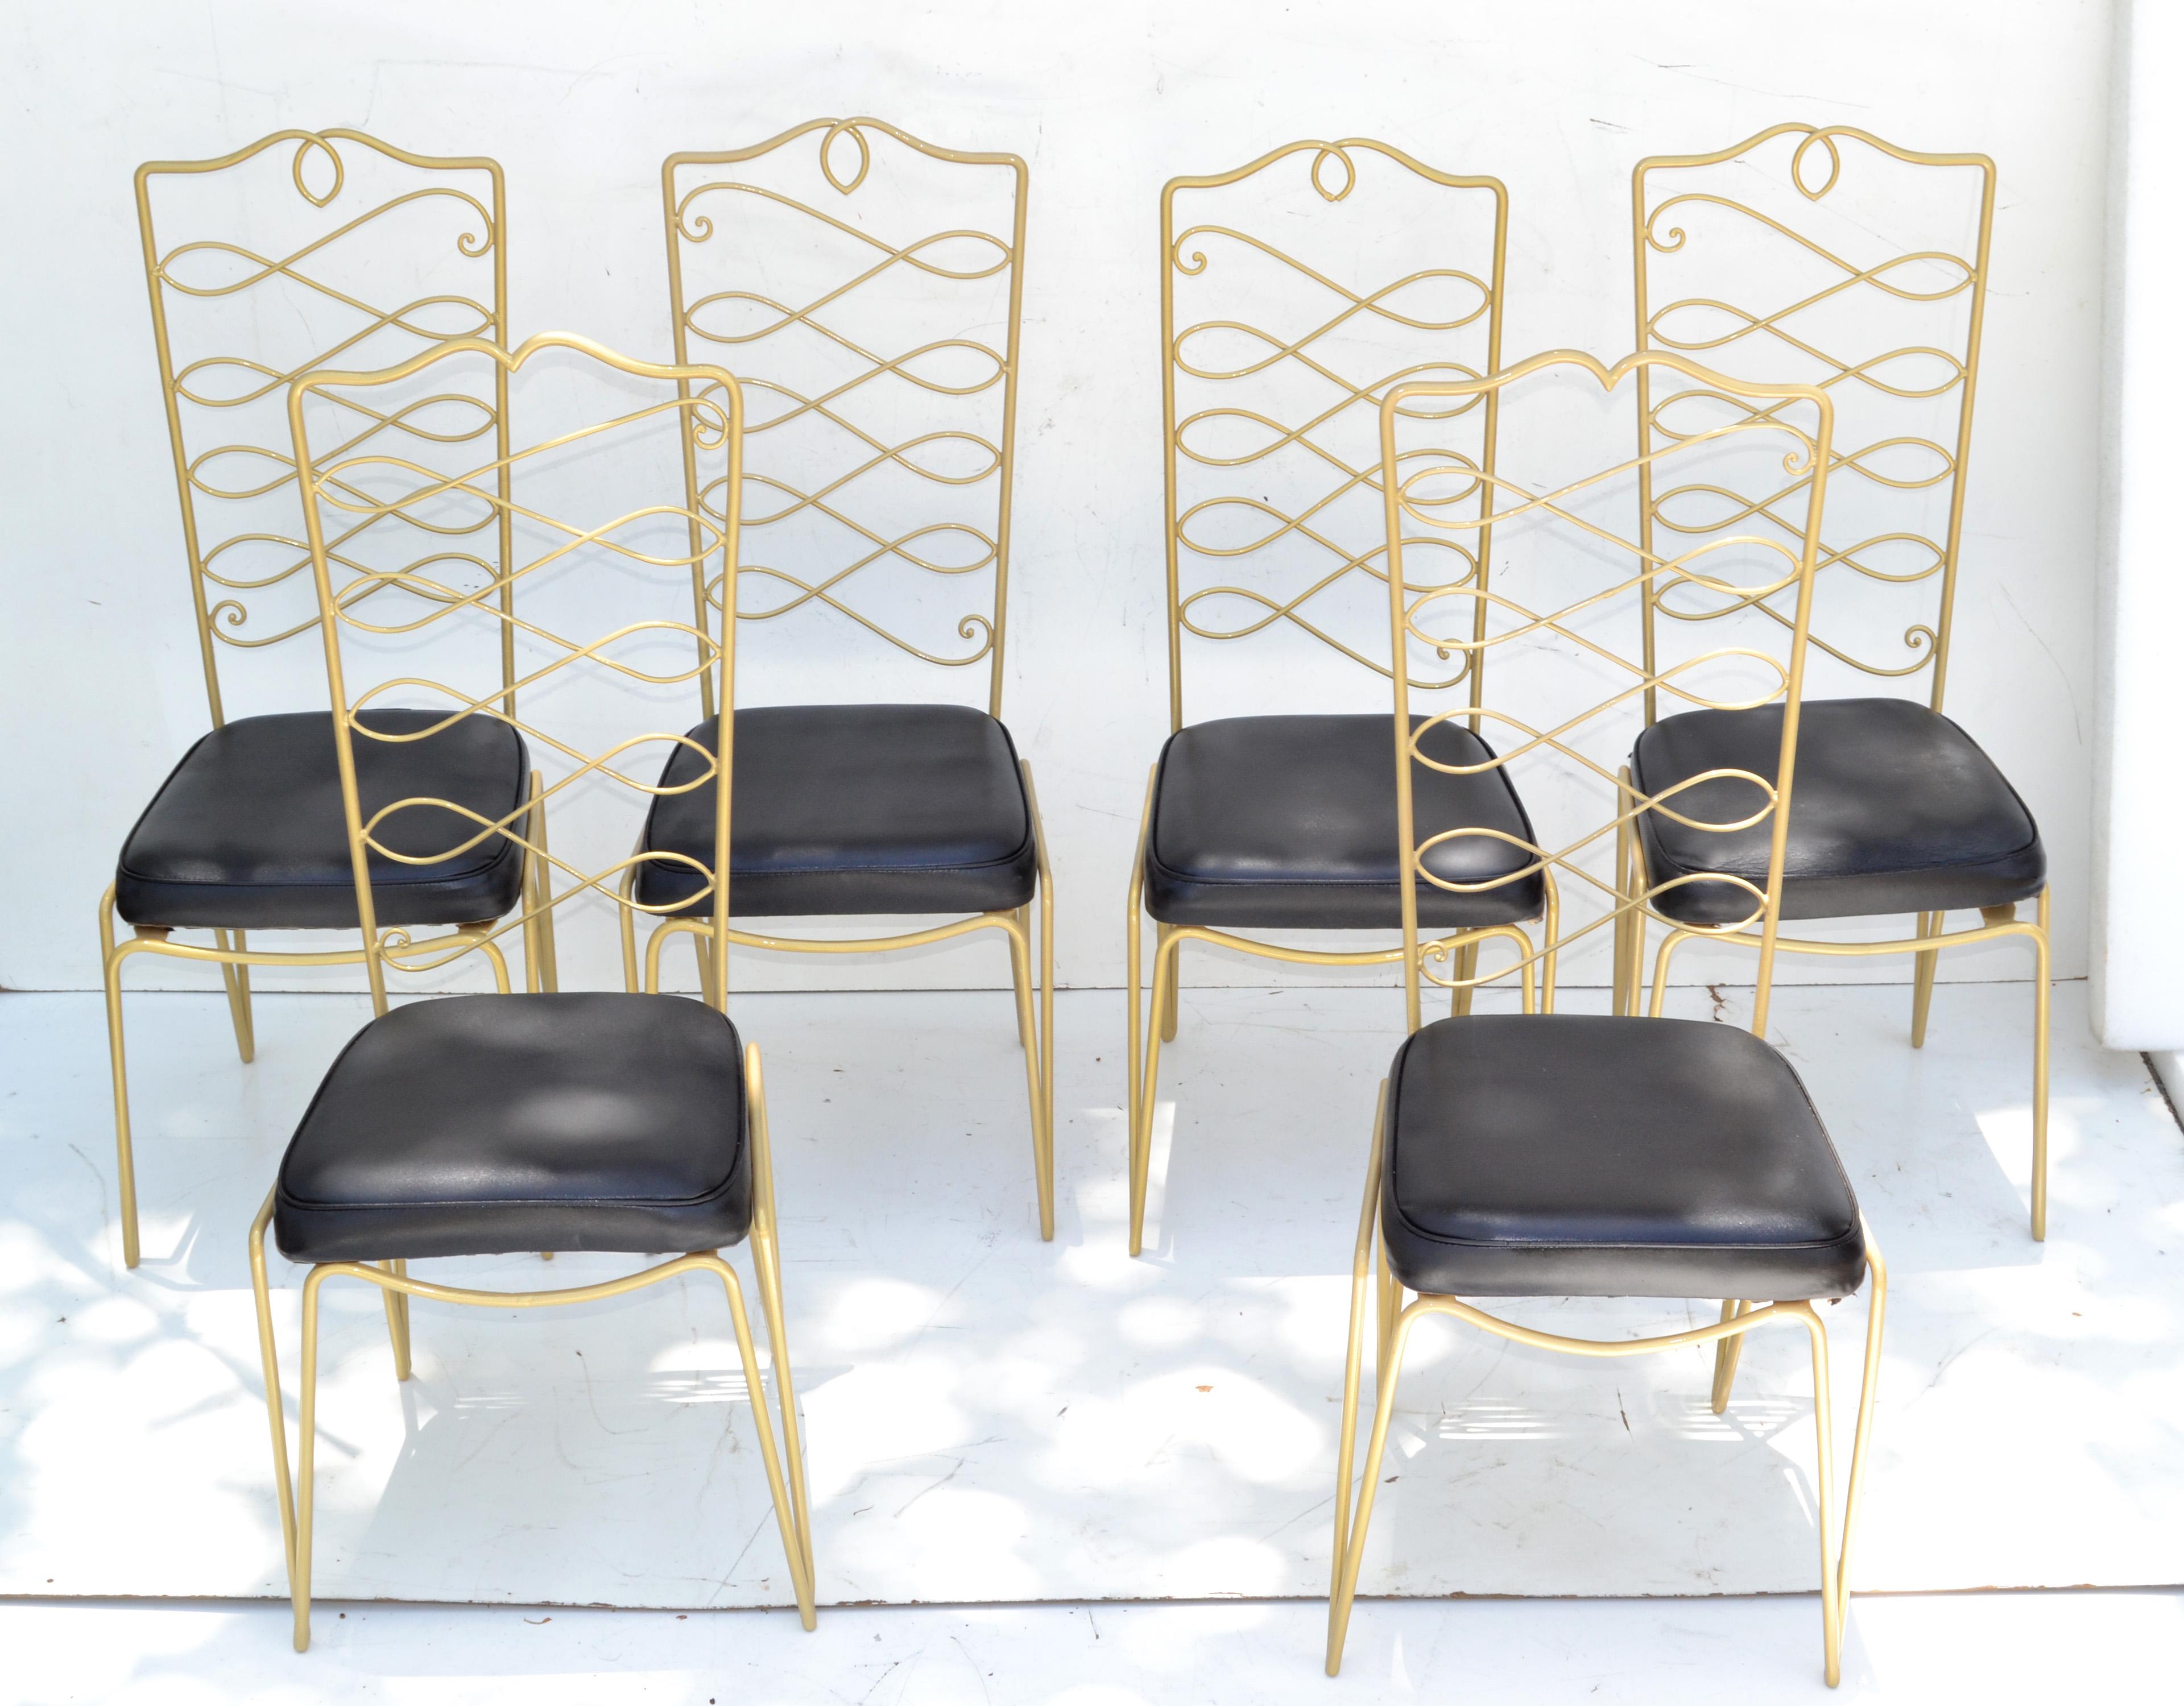 Rene Prou Art Deco Golden Wrought Iron Dining Room Chairs Black Vinyl Seats, 6 In Good Condition For Sale In Miami, FL